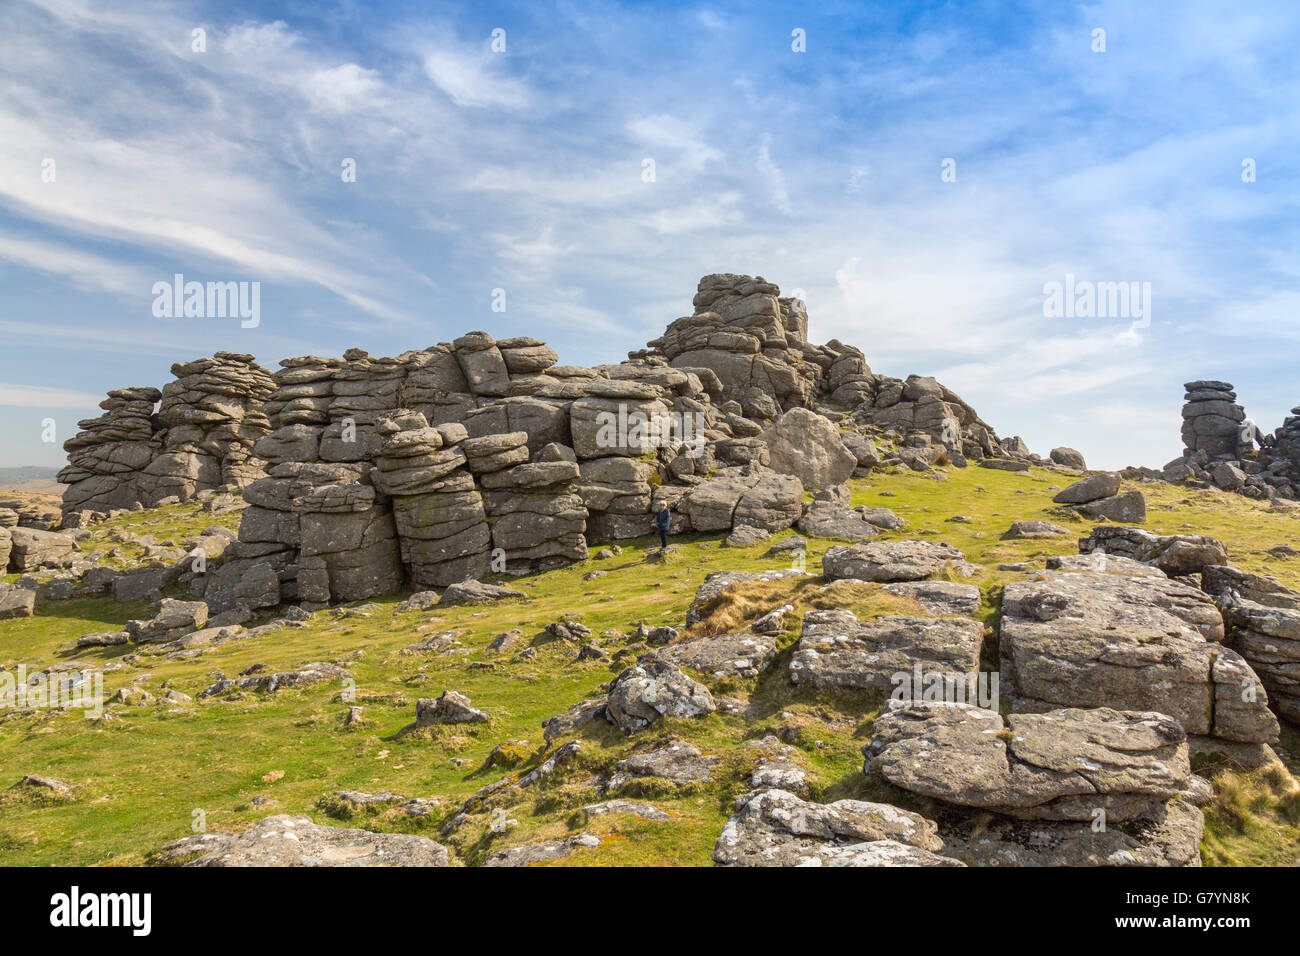 The granite of Hound Tor has been weathered by millions of years of wind, rain and frost on Dartmoor, Devon, England, UK Stock Photo